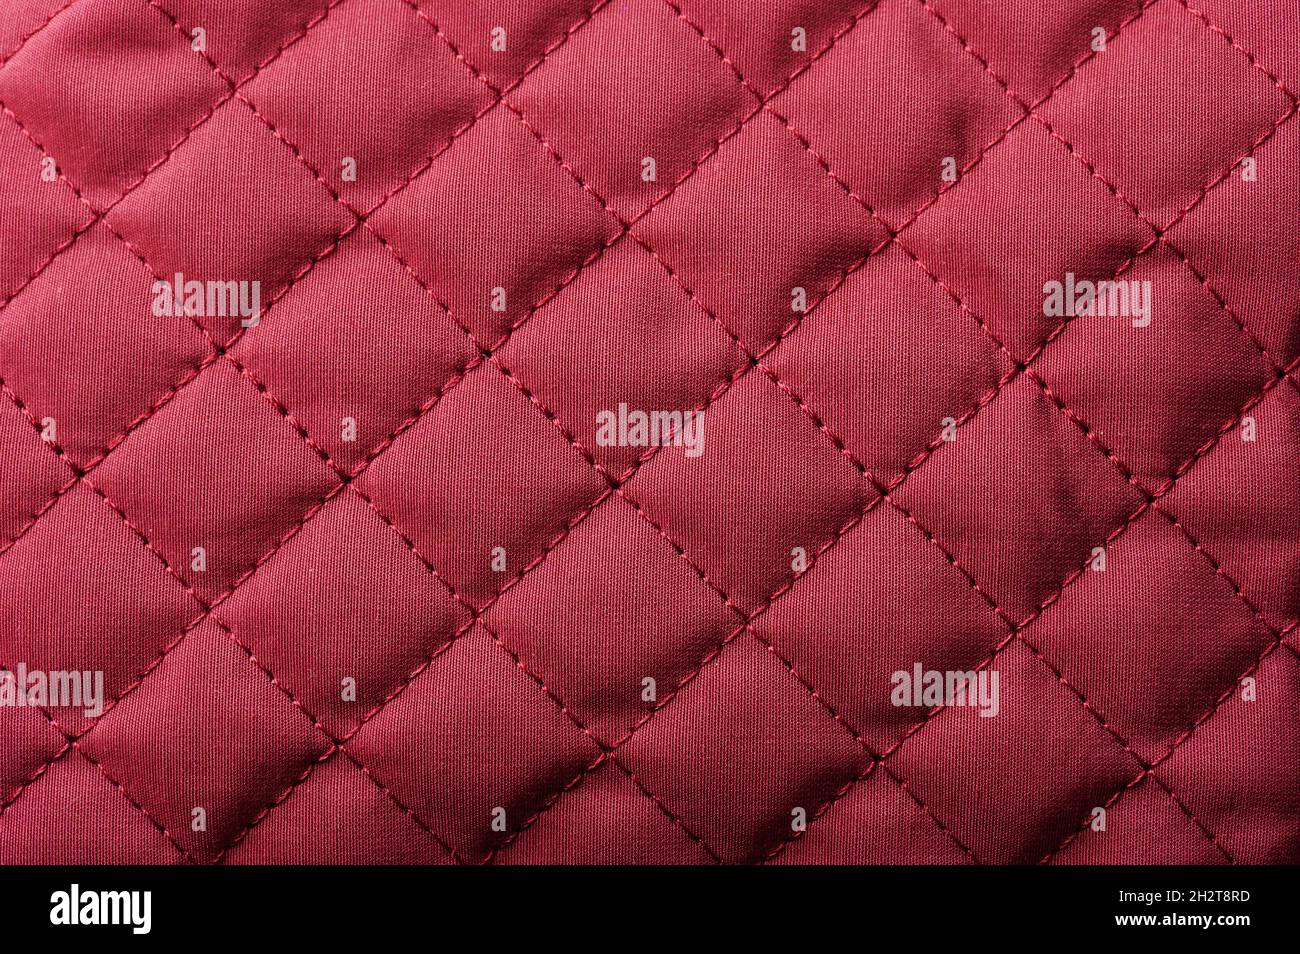 Red  tufted fabric material close up background with stitches Stock Photo